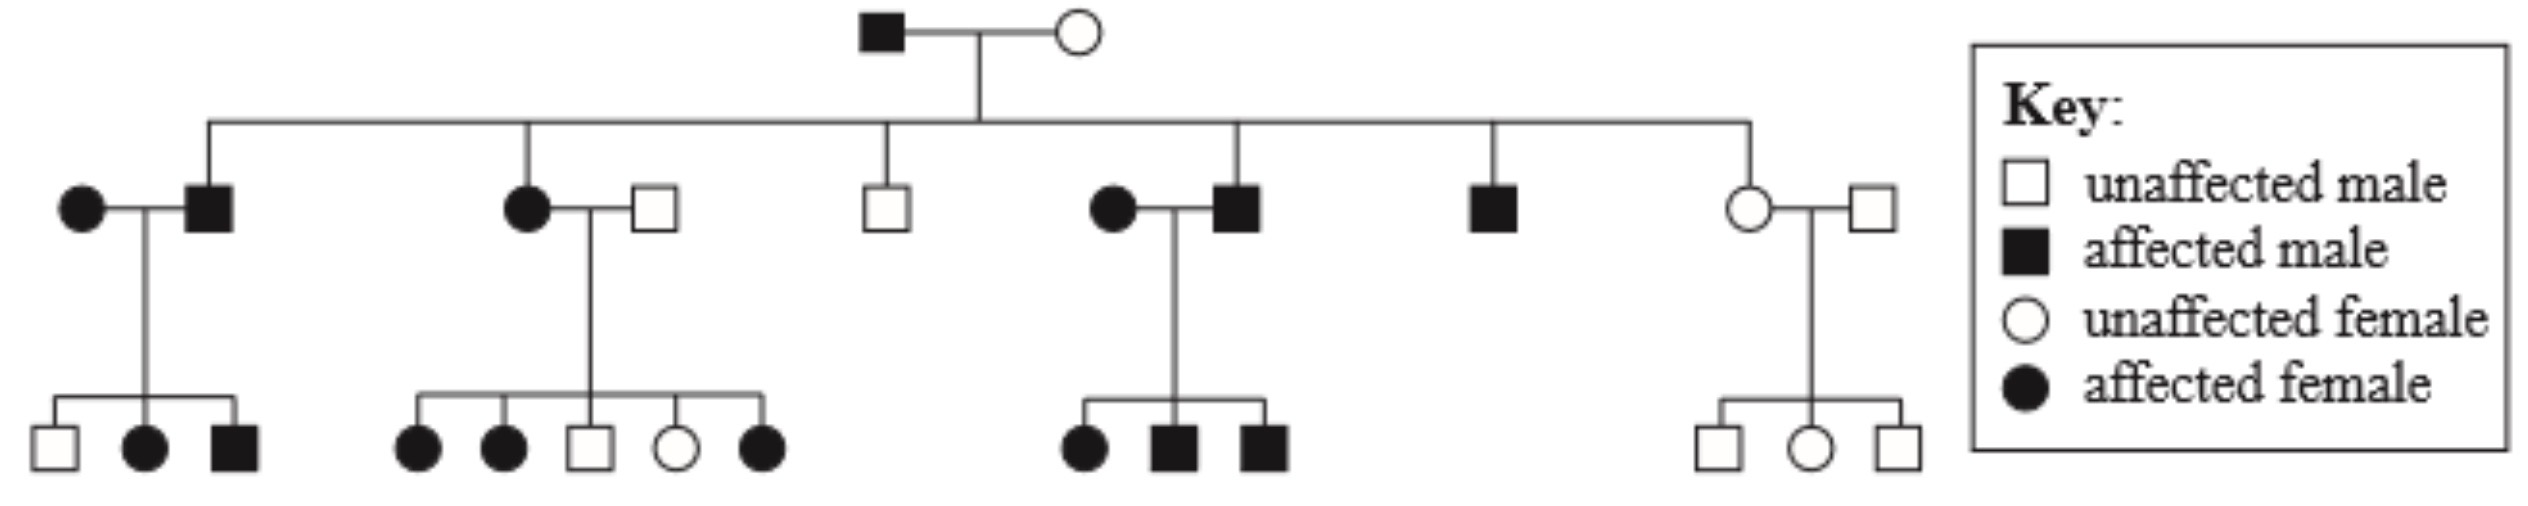 <p>What evidence is given in the pedigree chart to prove that the condition is caused by a dominant allele?</p>